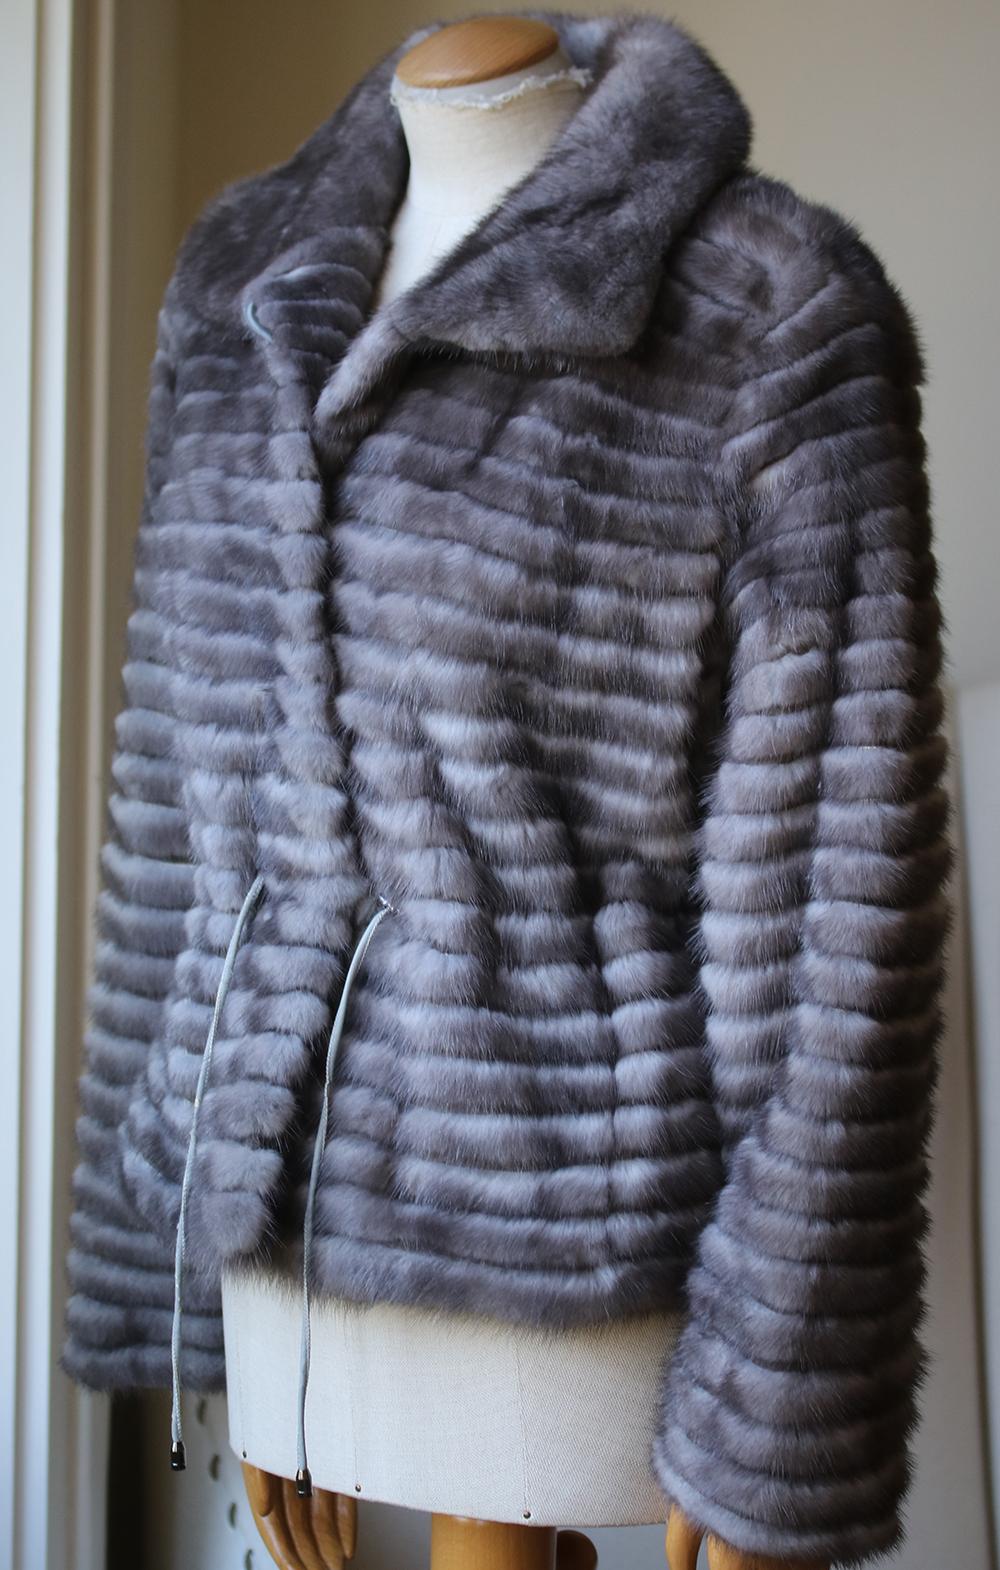 This is a lust-worthy, once-in-a-lifetime luxuriously indulgent jacket with an oversized collar and optional drawstring waist. Hook and eye fastening. 100% Mink. Lined in silk.

Size: Small (UK 8, US 4, FR 36, IT 40)

Condition: As new condition, no